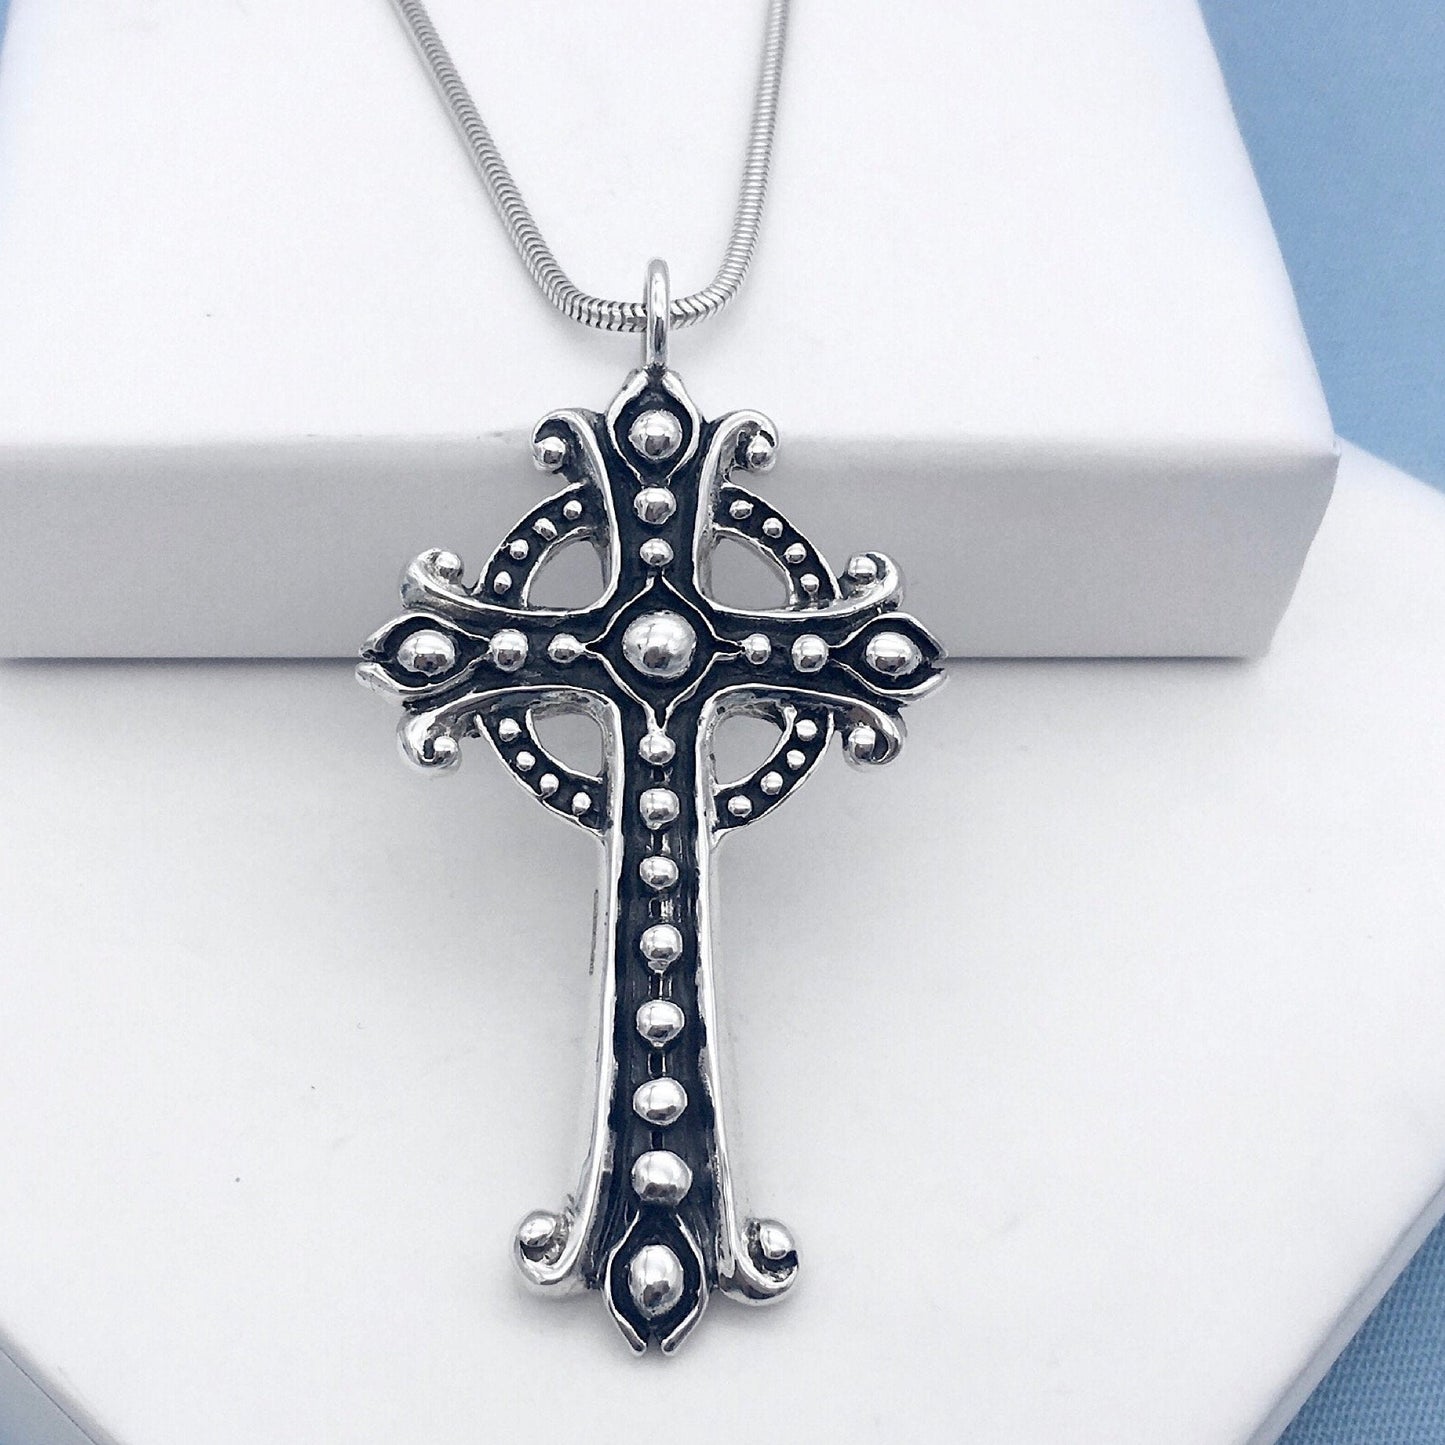 Silver Cross Pendant 2 Sided Crucifix Unusual Jewelry Religious Bridal Gifts Baptism Gift Idea Unique Silver Cross Pendant Fish Supper Cross